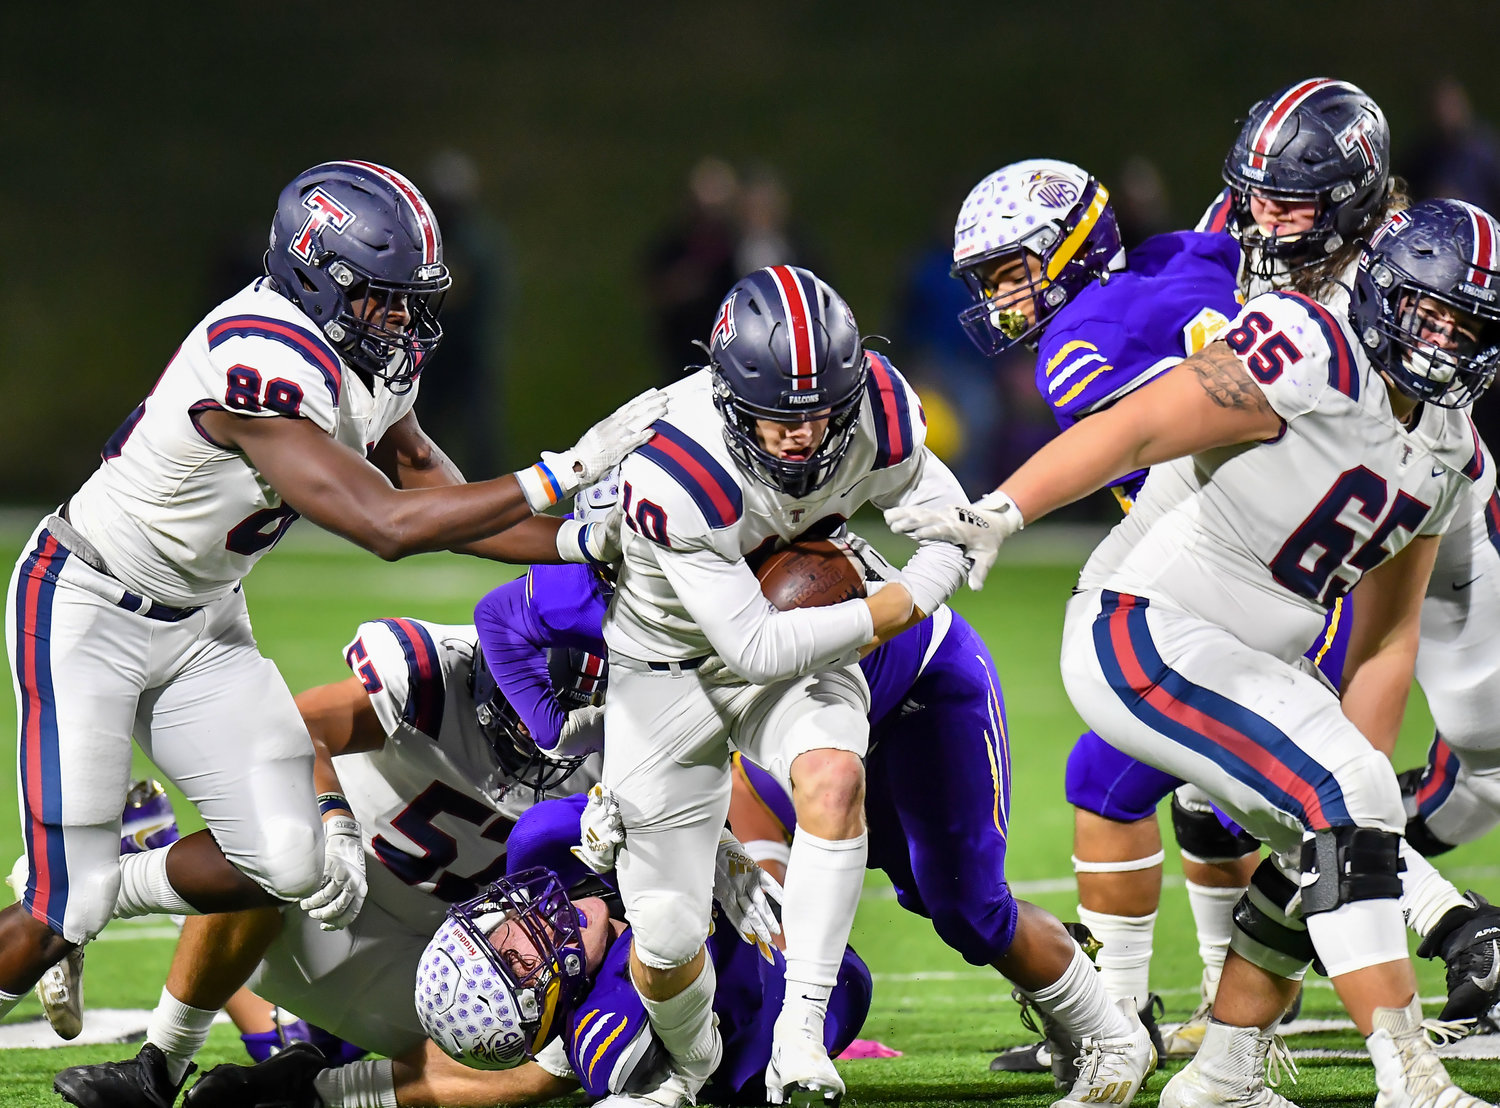 Houston Tx. Nov 19, 2021:  Tompkins #10 Wyatt Young rushes for a first down during the UIL area playoff game between Tompkins and Jersey Village at Pridgeon Stadium in Houston. (Photo by Mark Goodman / Katy Times)